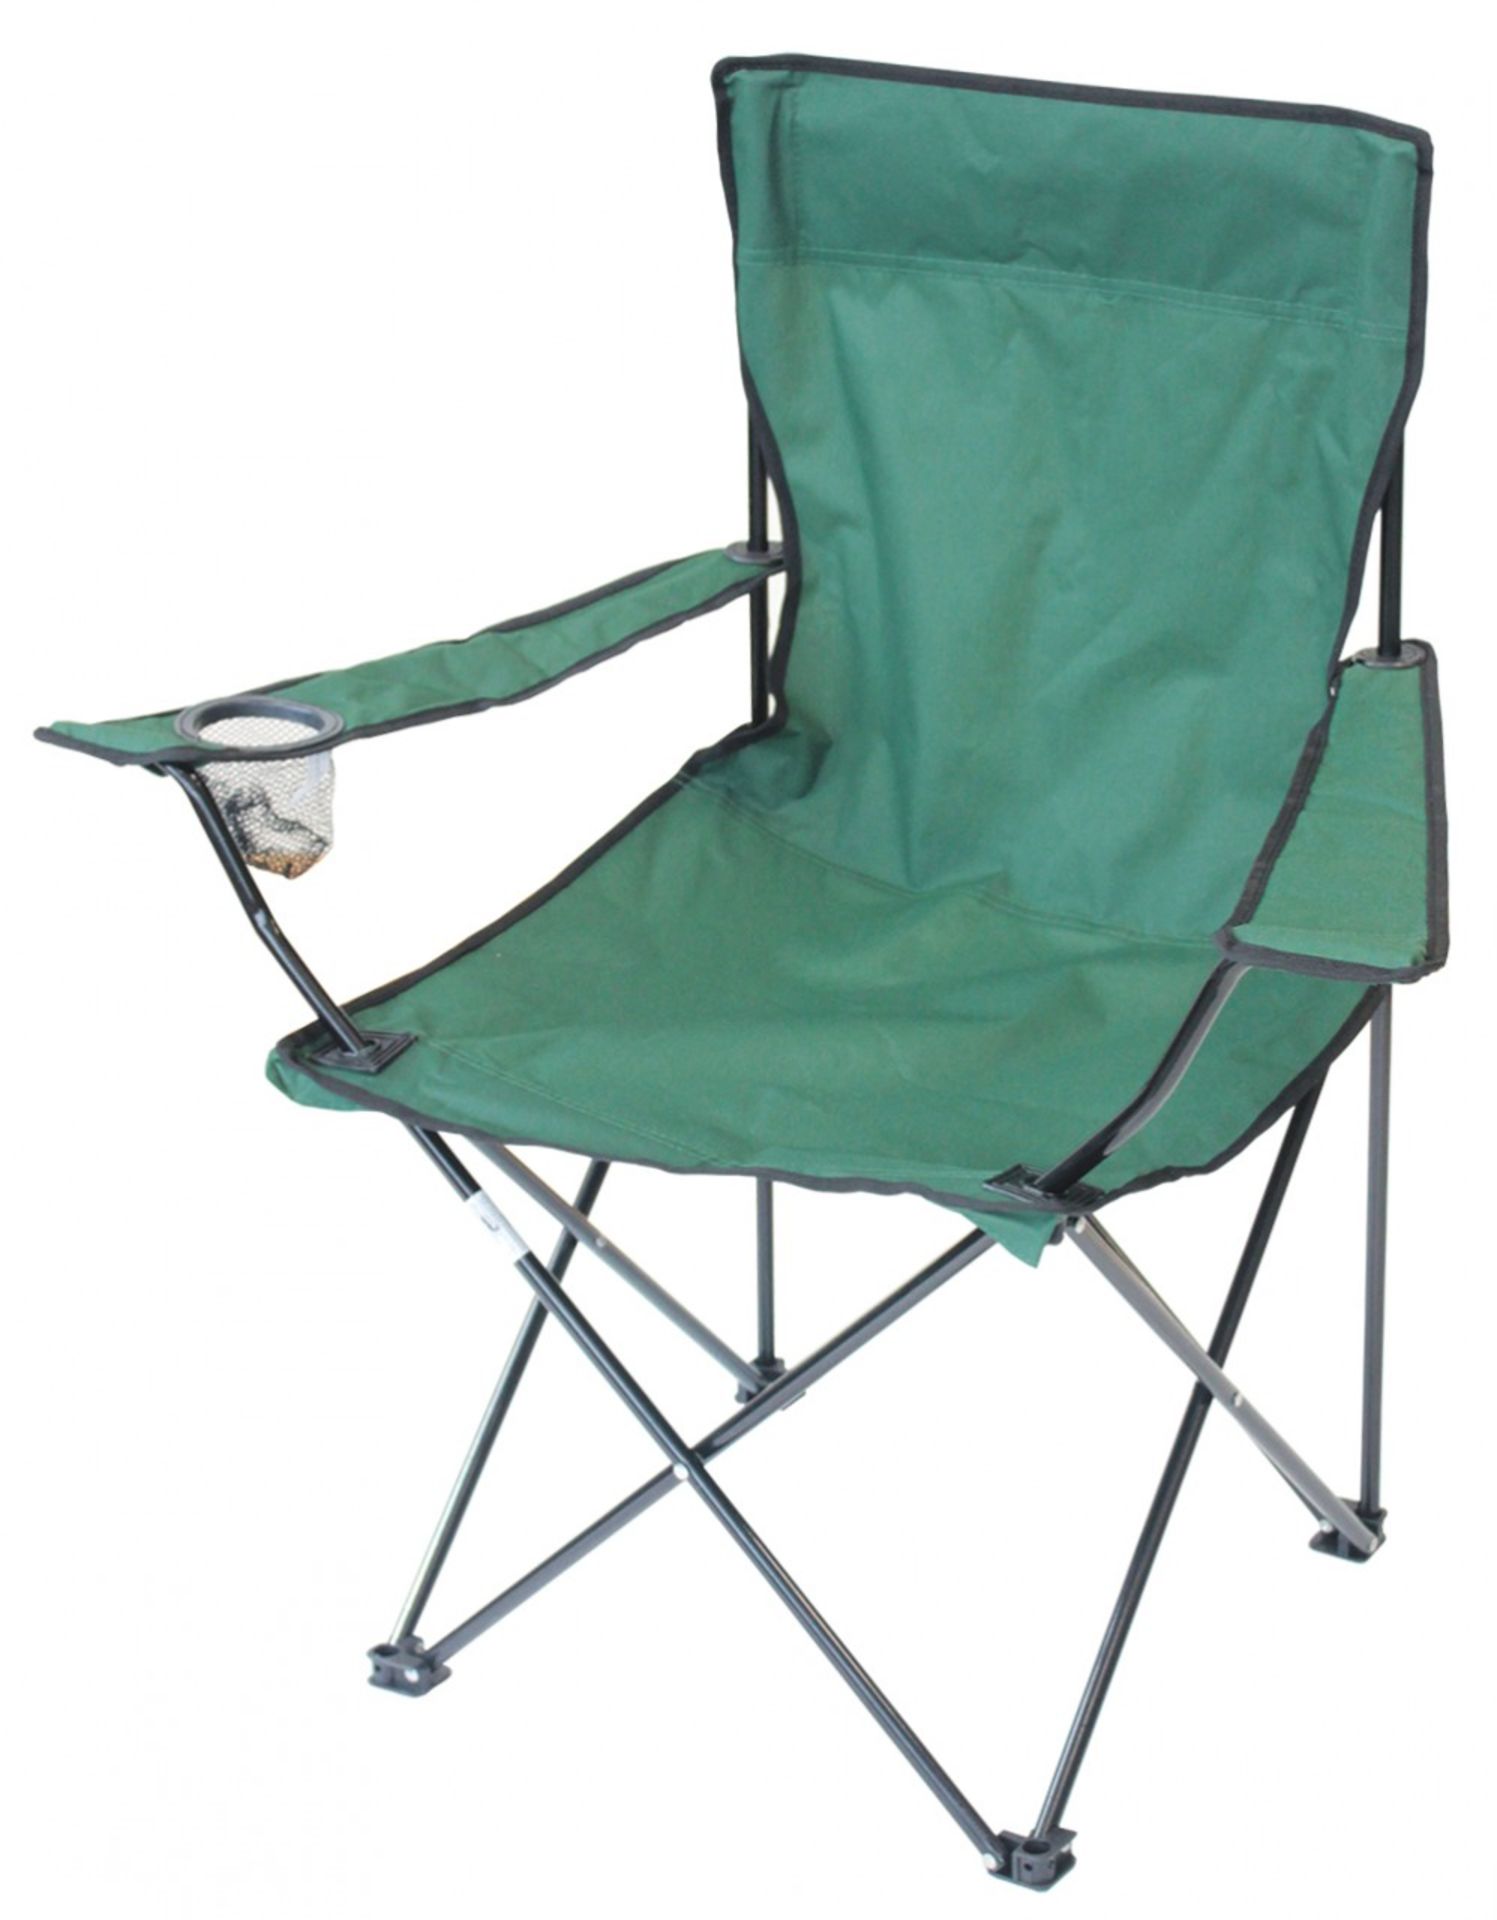 V Brand New Folding Outdoor Chair with Cup Holder RRP £15 (similar Millets) X 2 YOUR BID PRICE TO BE - Image 2 of 2